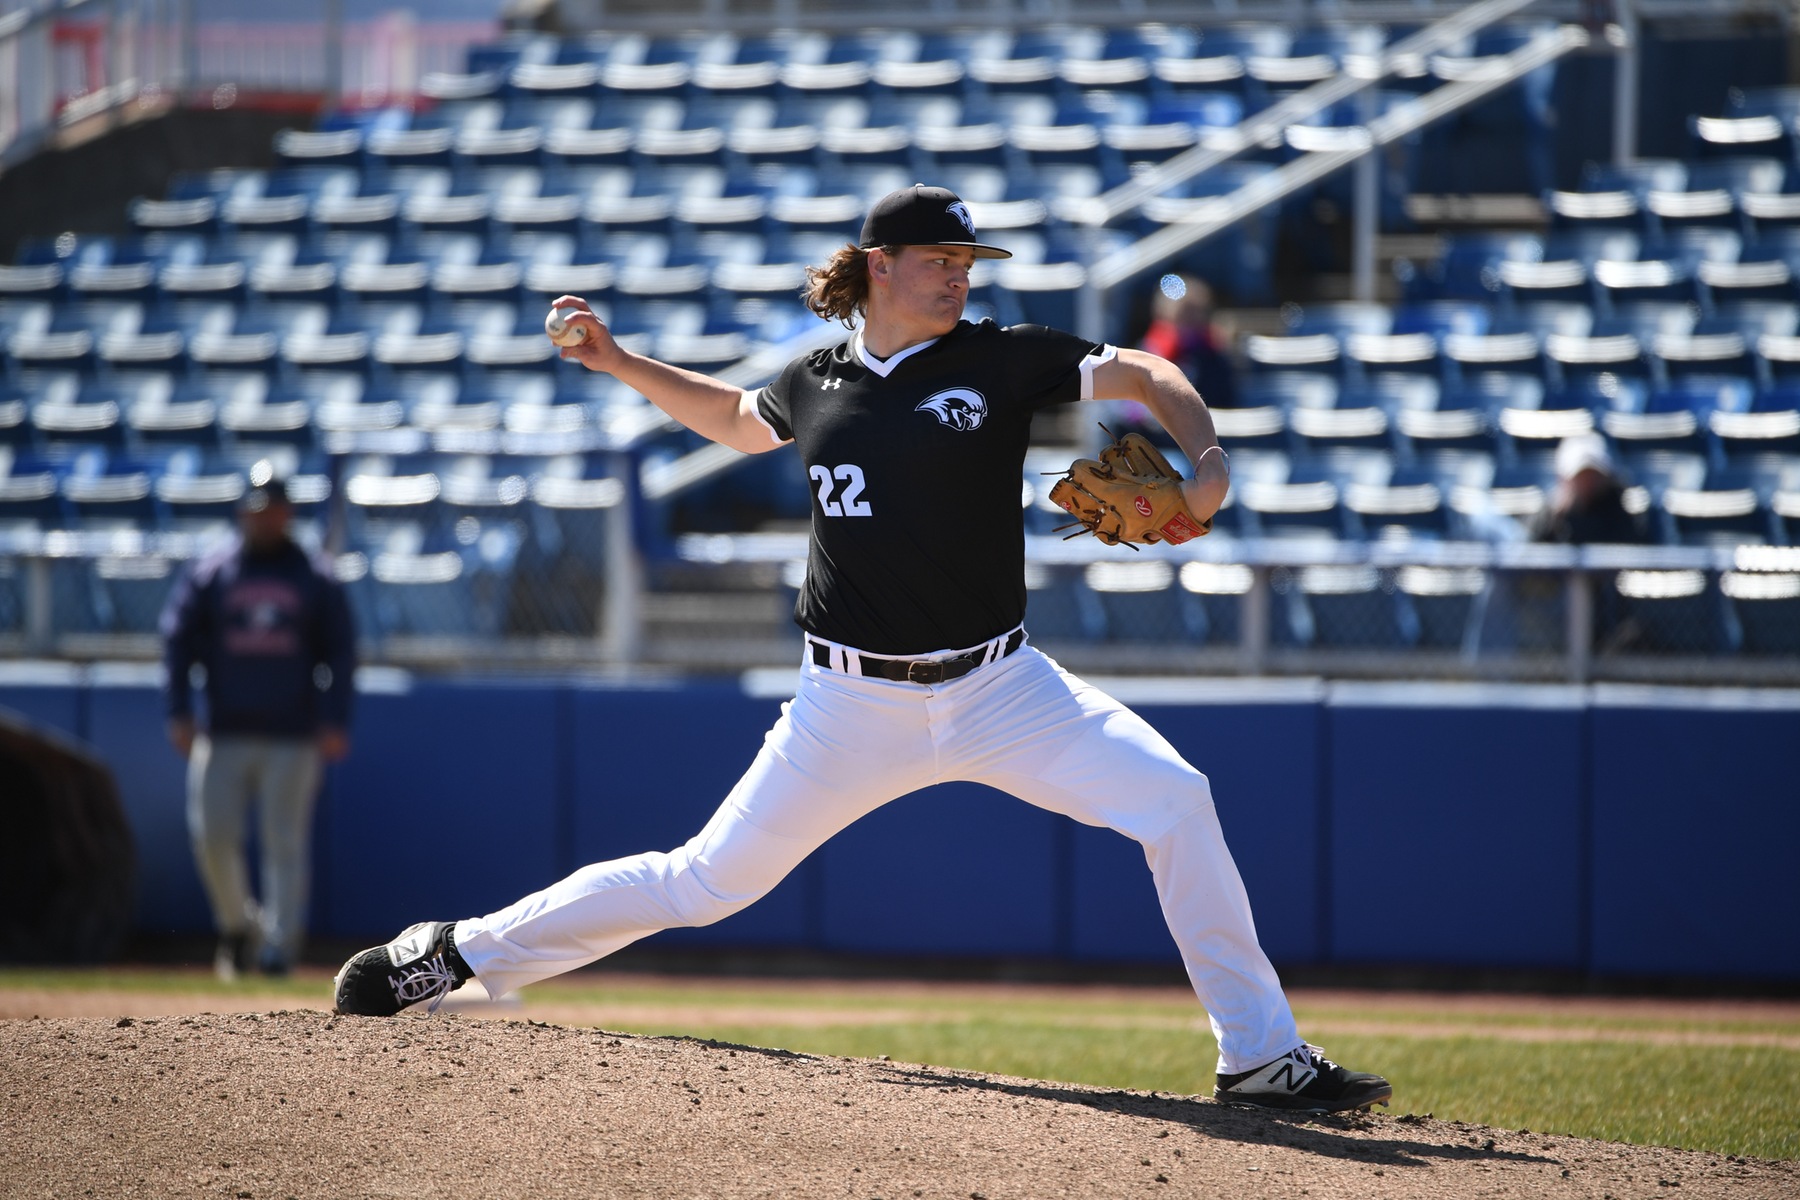 Kevin Ledford struck out five to pick up the save.